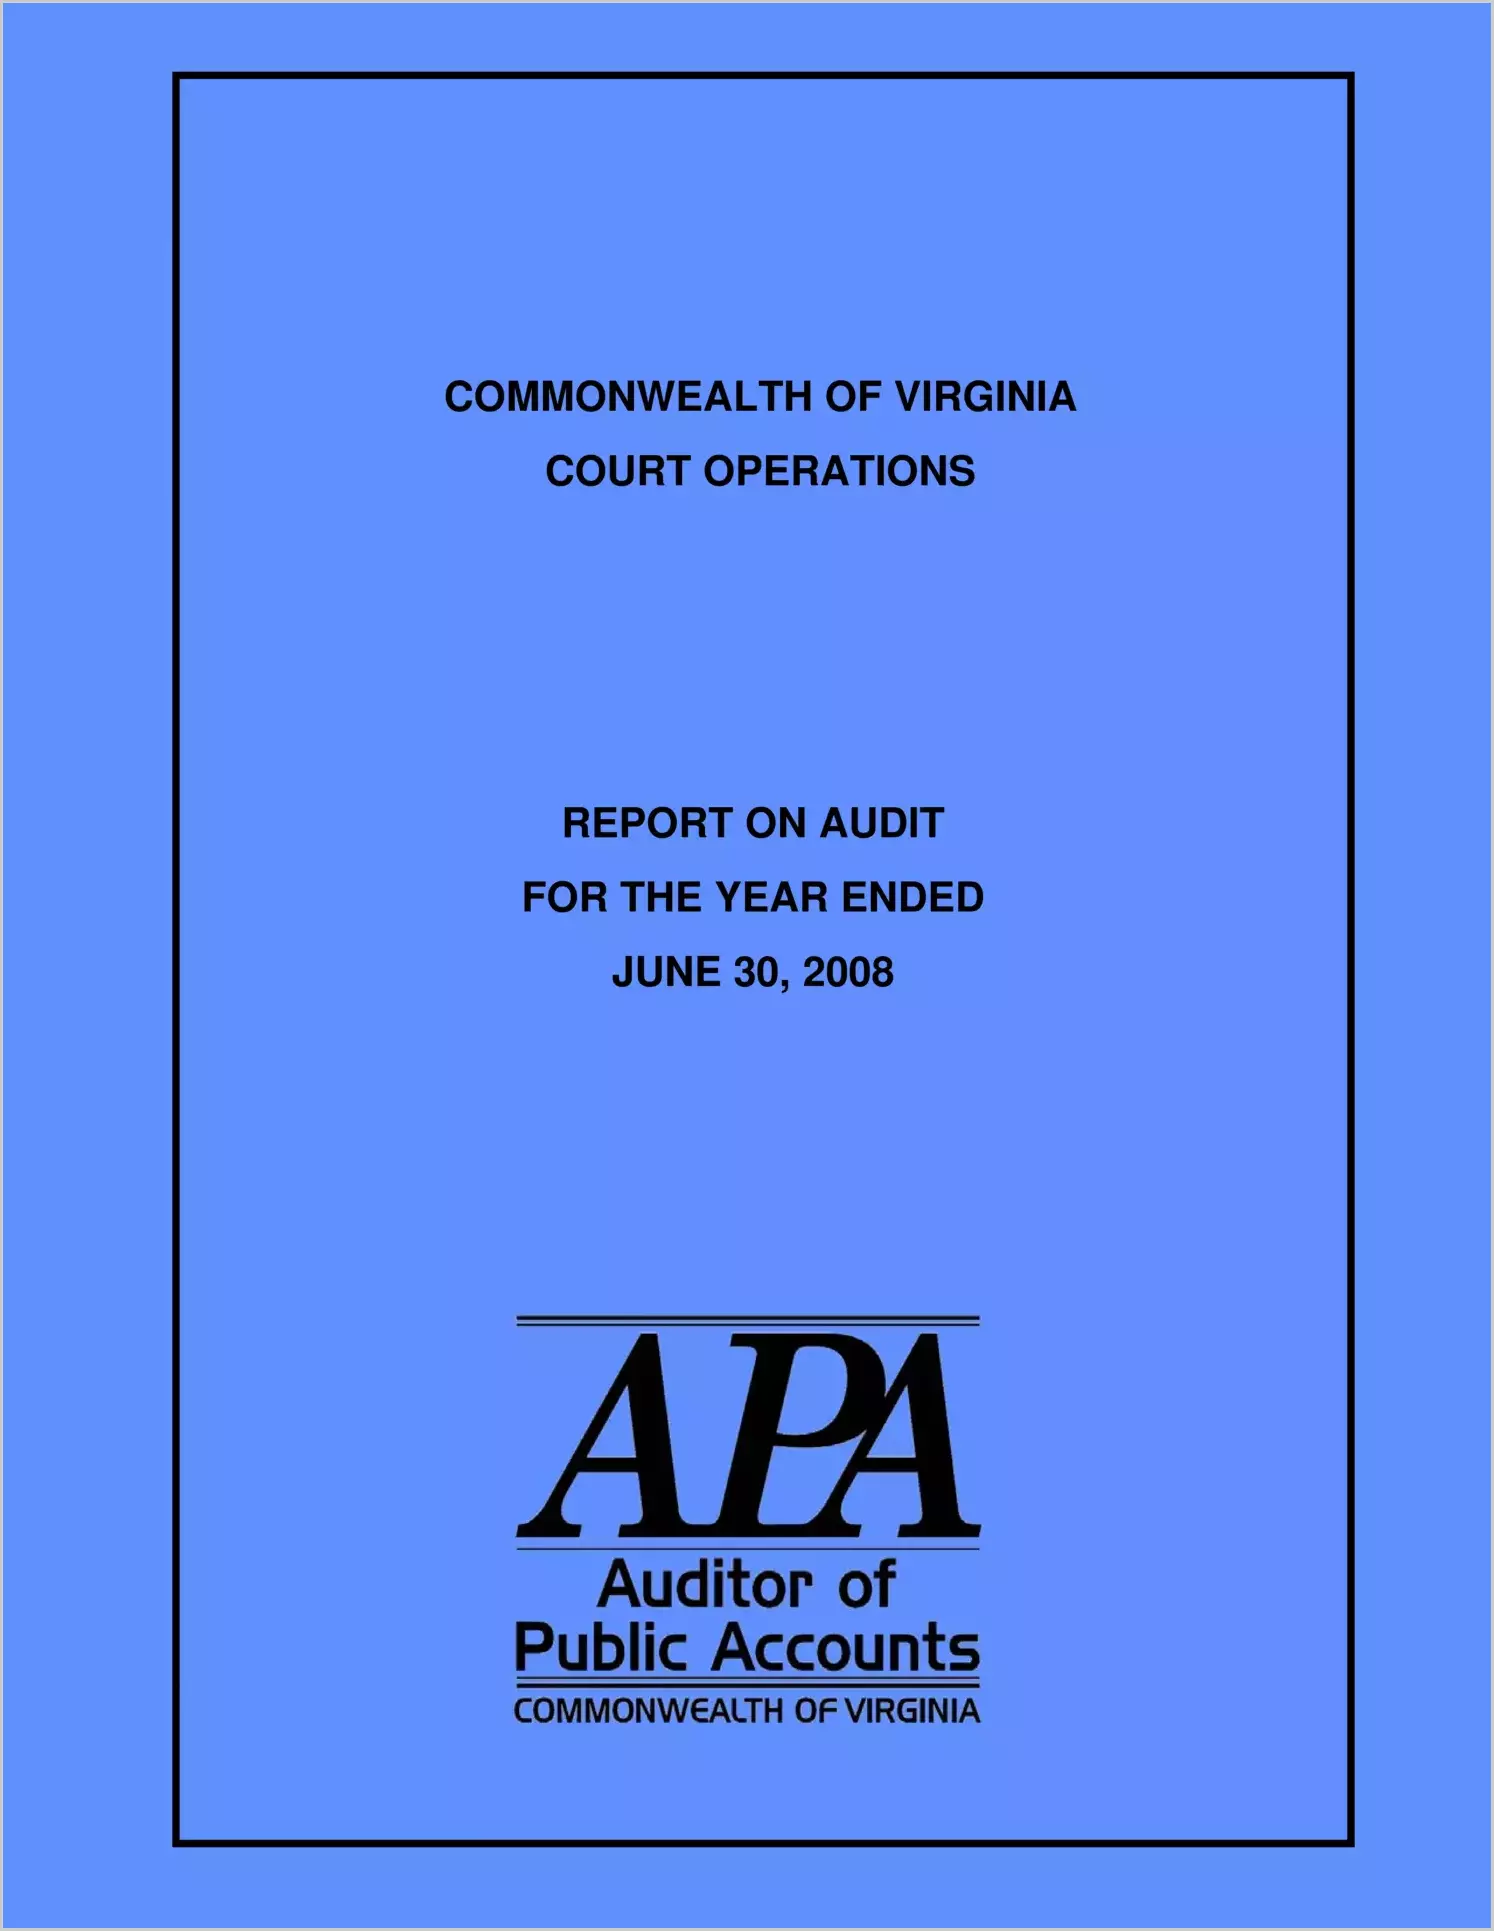 Commonwealth of Virginia Court Operations With Appendix for the year ended June 30, 2008